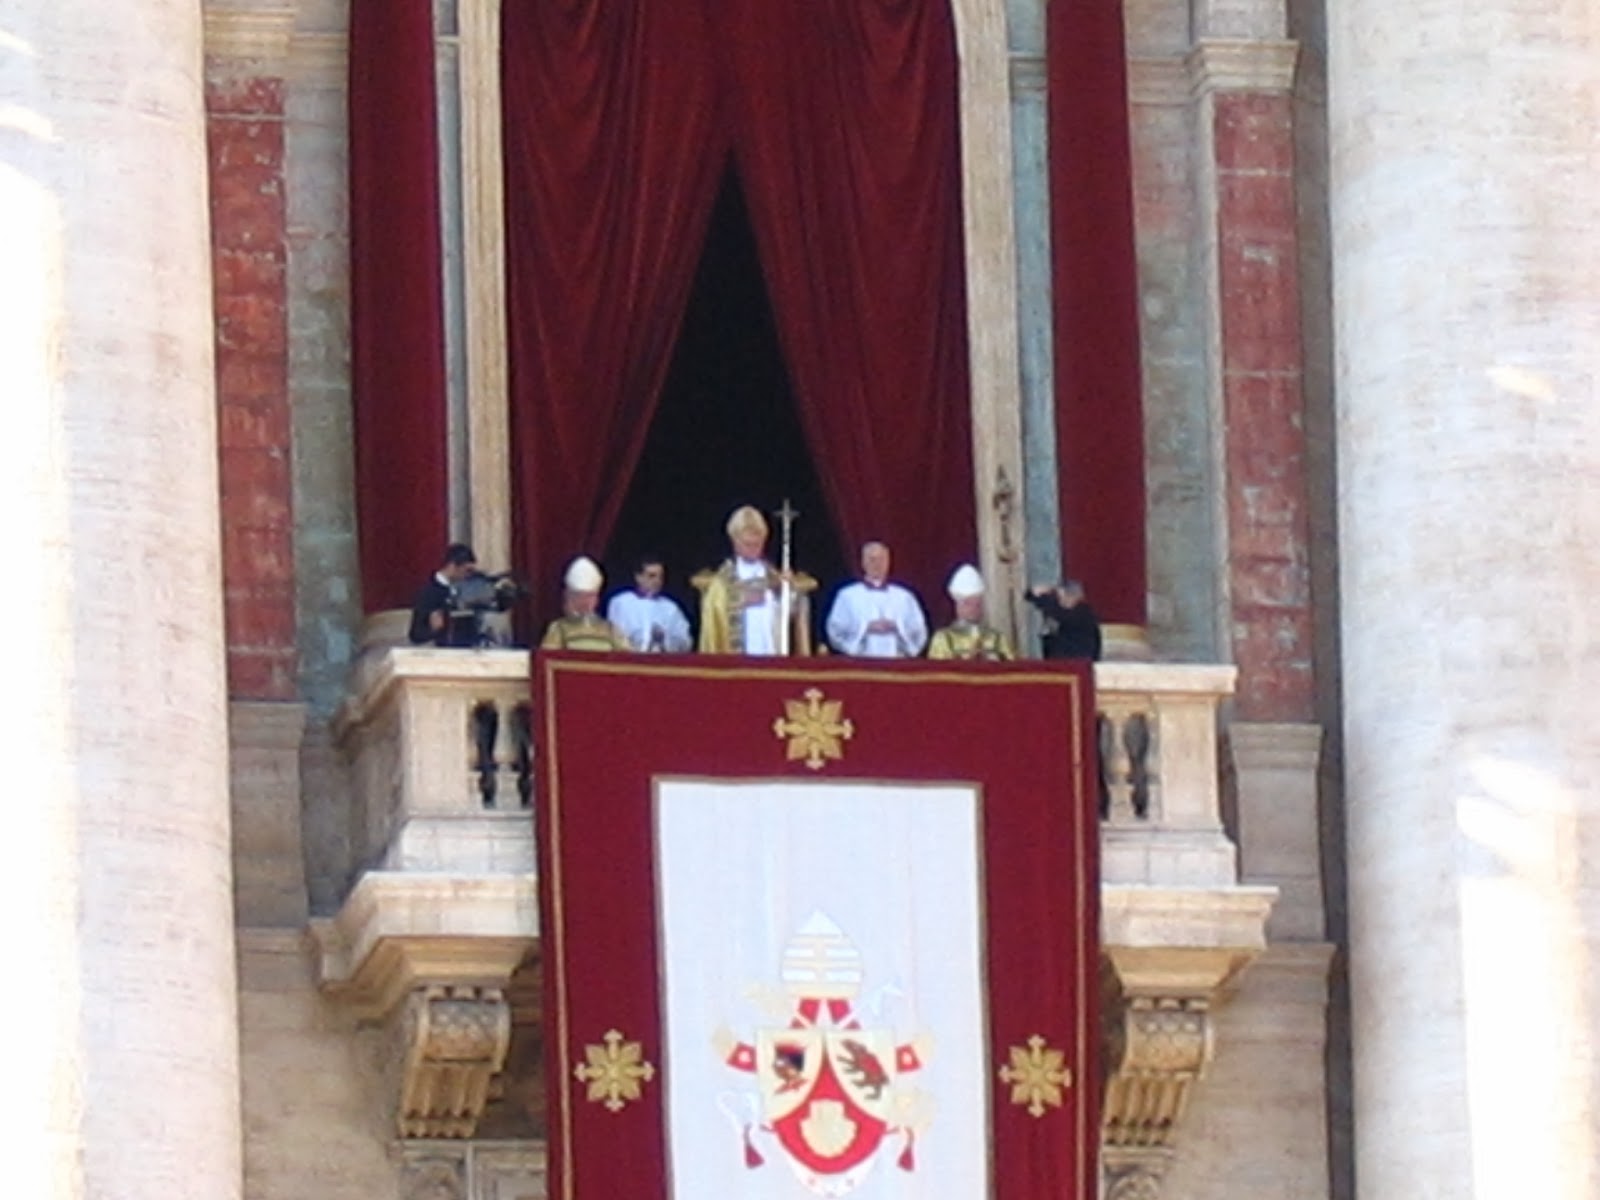 The Pope addressing the crowd on Christmas Day